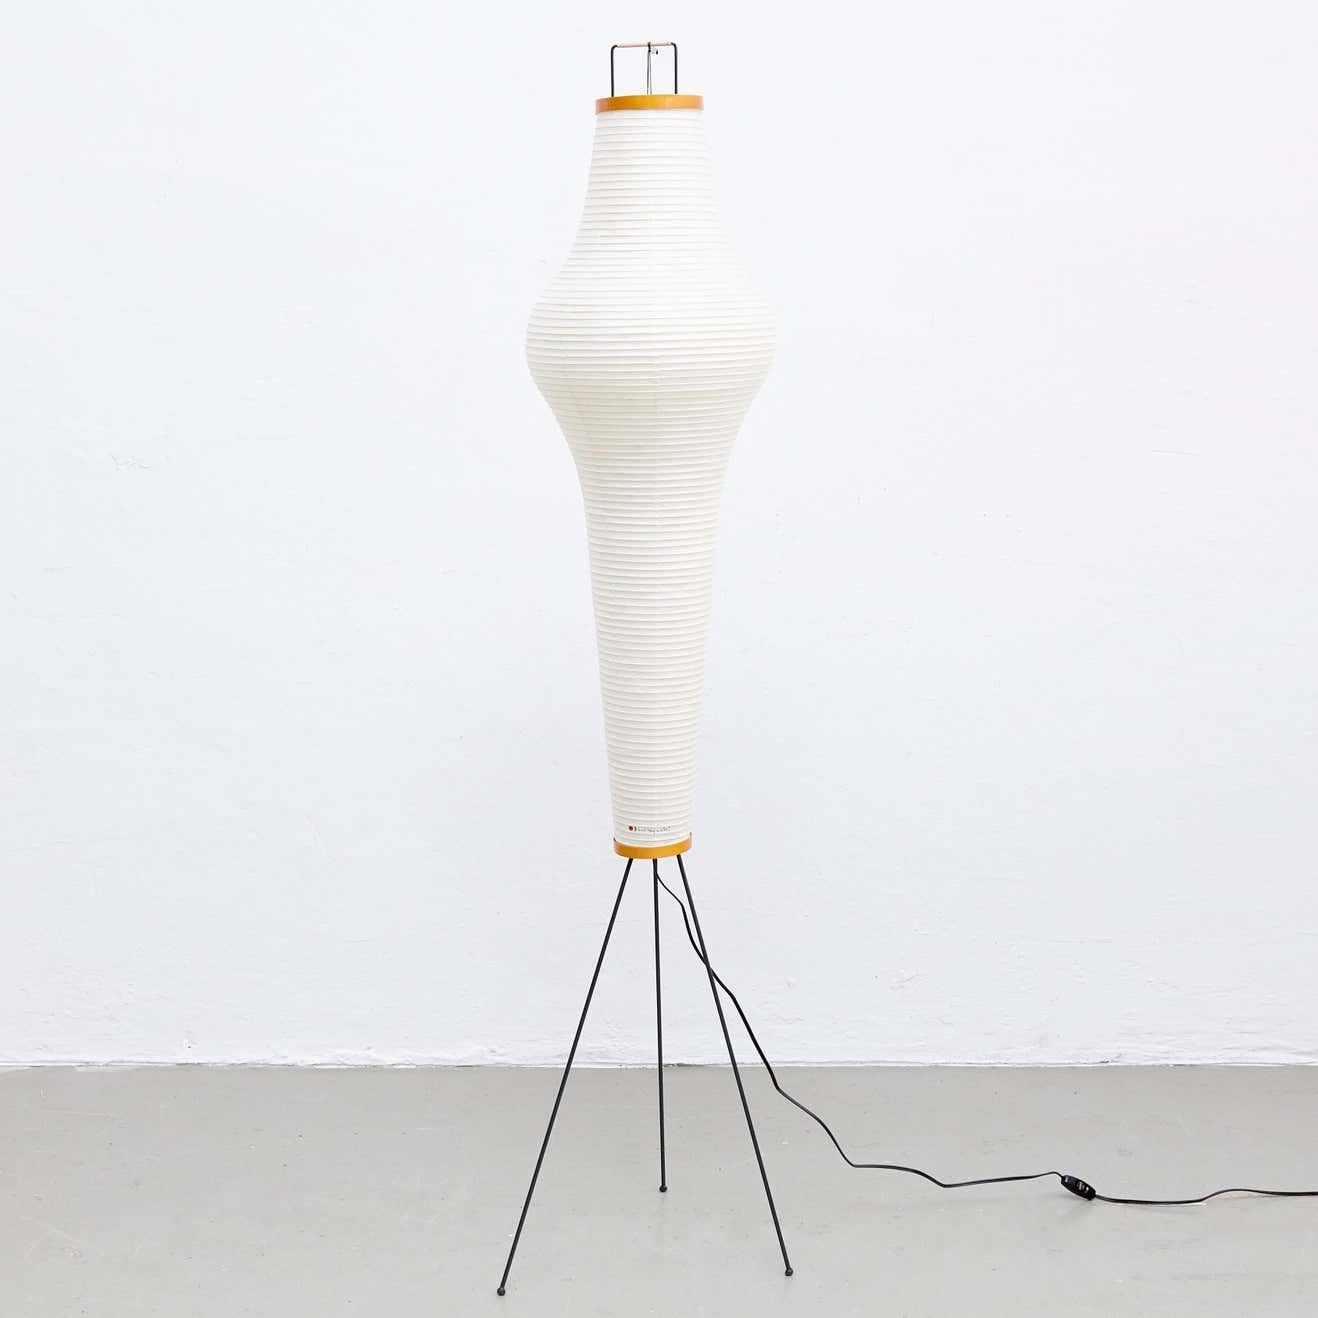 Floor lamp, model 14A, designed by Isamu Noguchi.
Manufactured by Ozeki & Company Ltd. (Japan.)
Bamboo ribbing structure covered by washi paper manufactured according to the traditional procedures.

In good vintage condition.

Edition signed